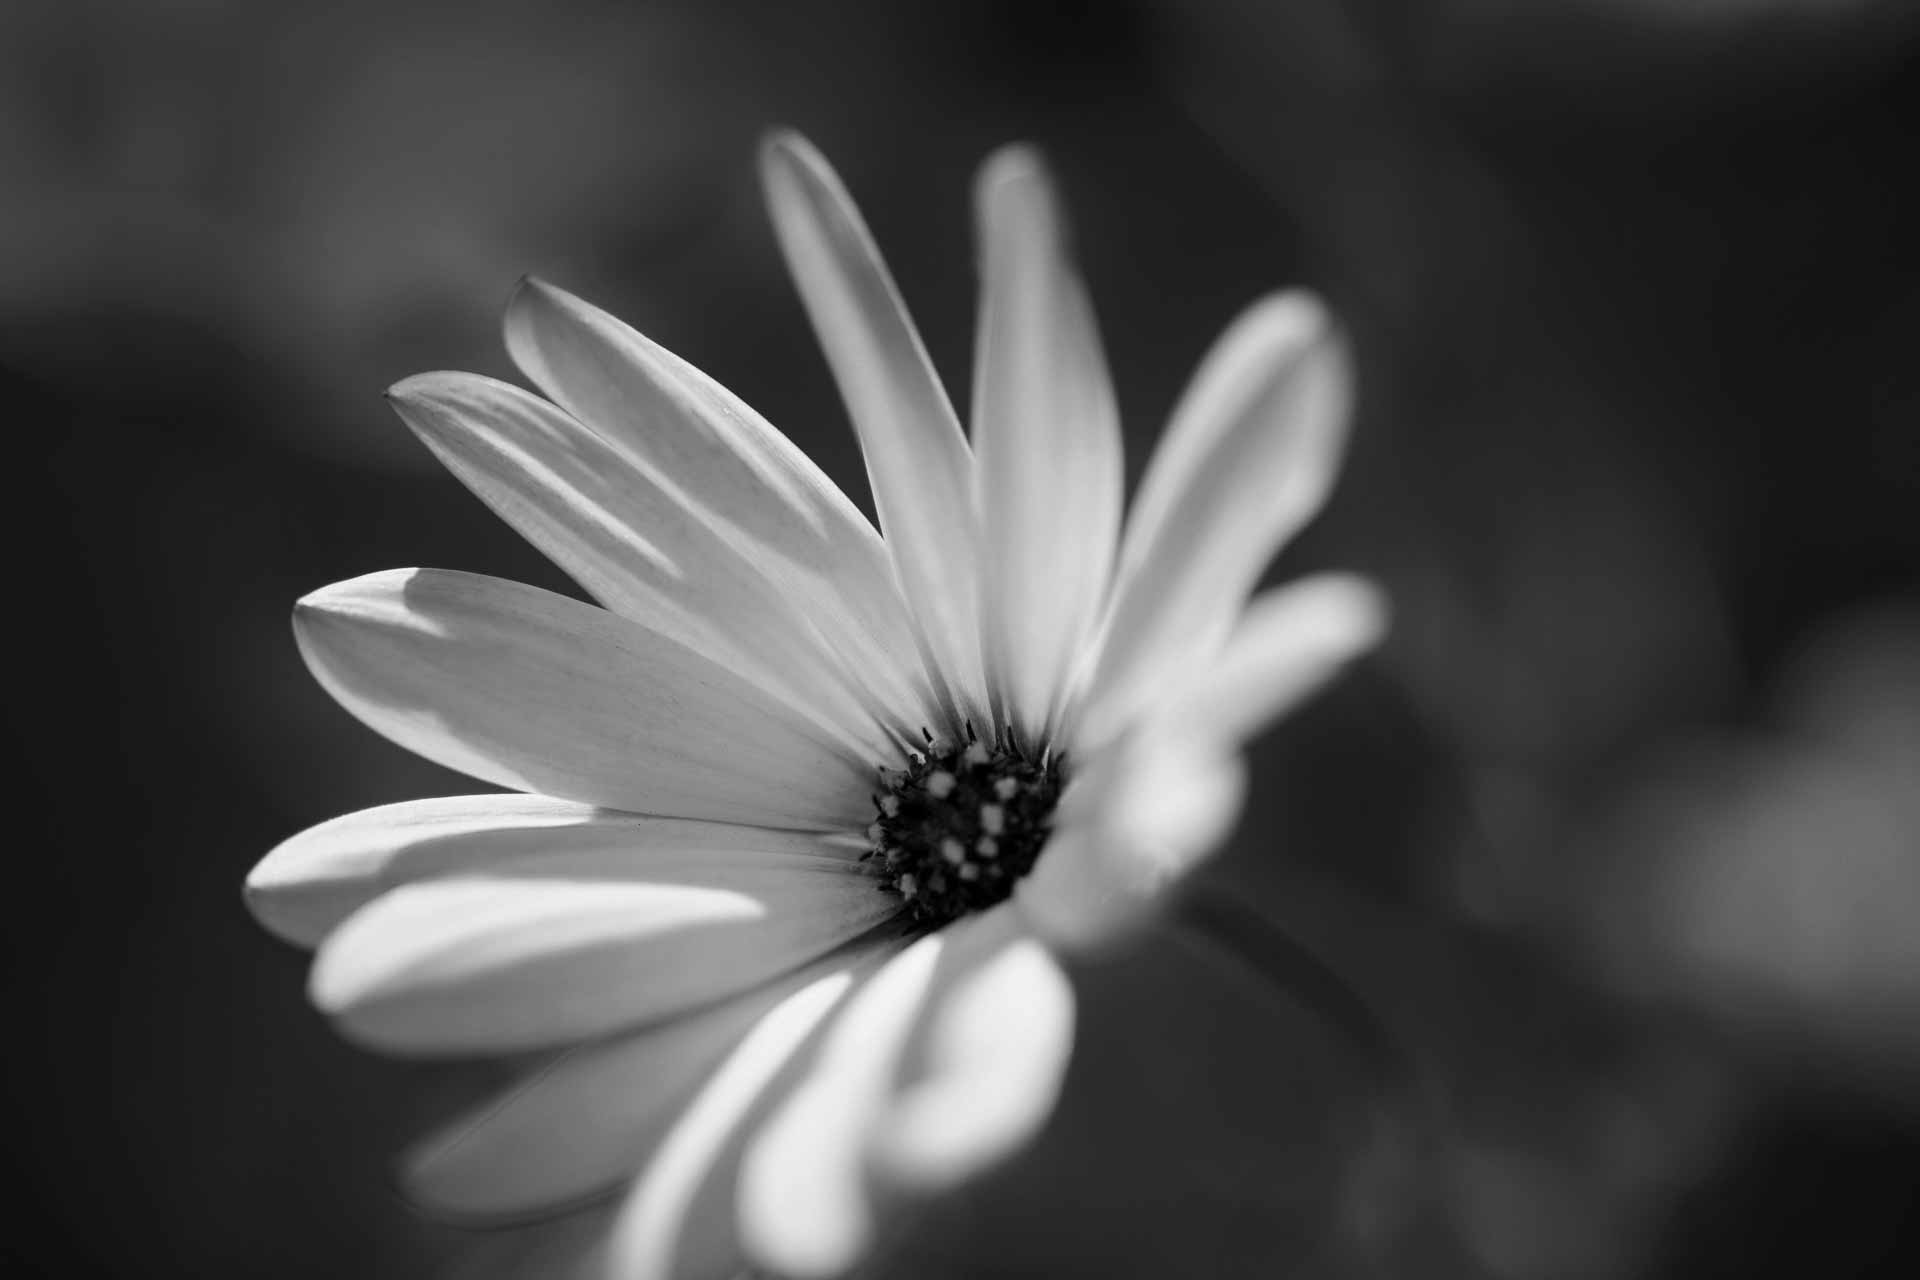 A black and white photo of an open flower - Daisy